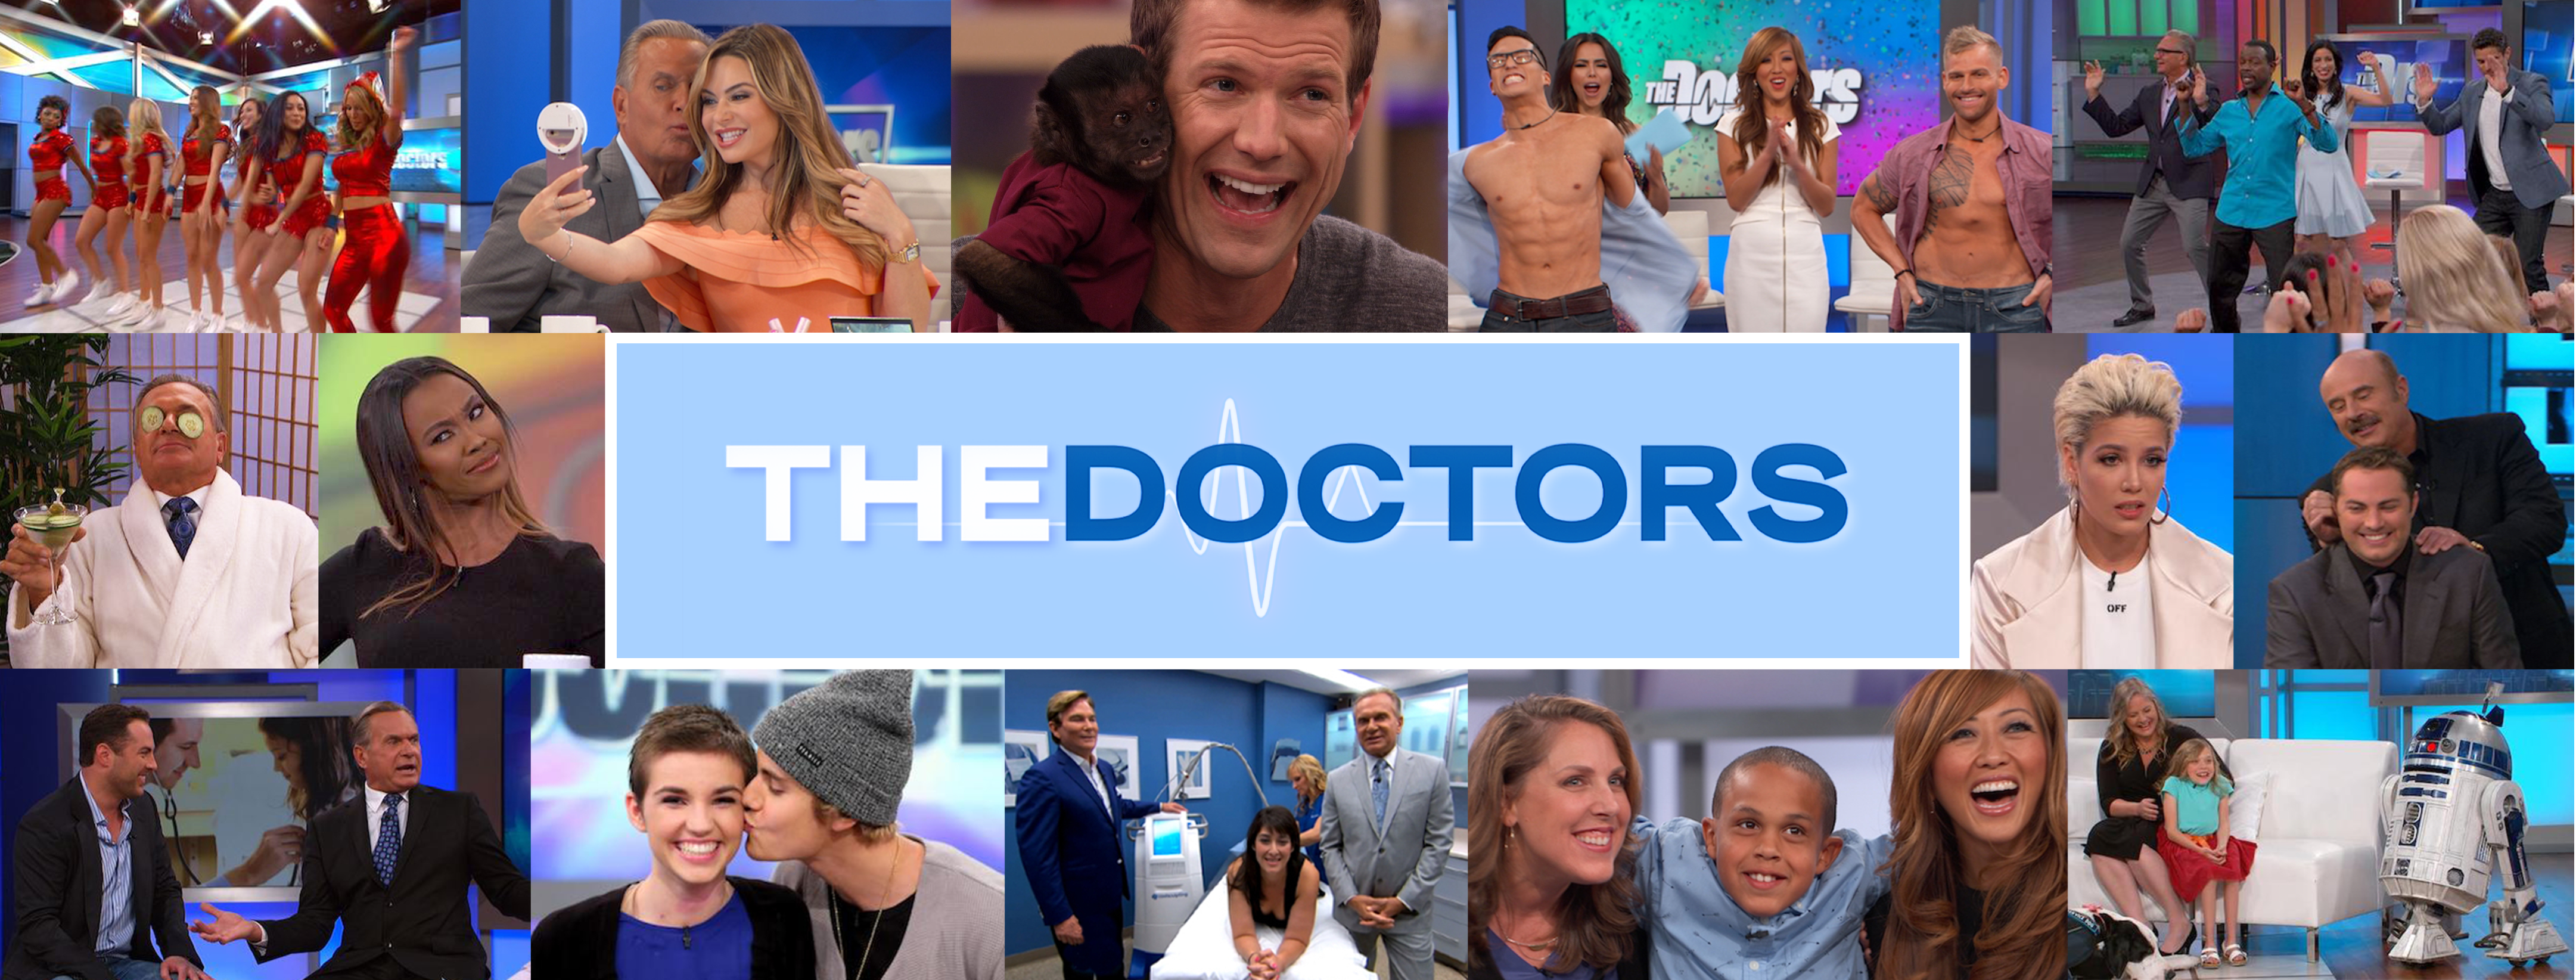 Excess Skin Removal Surgery | The Doctors TV Show